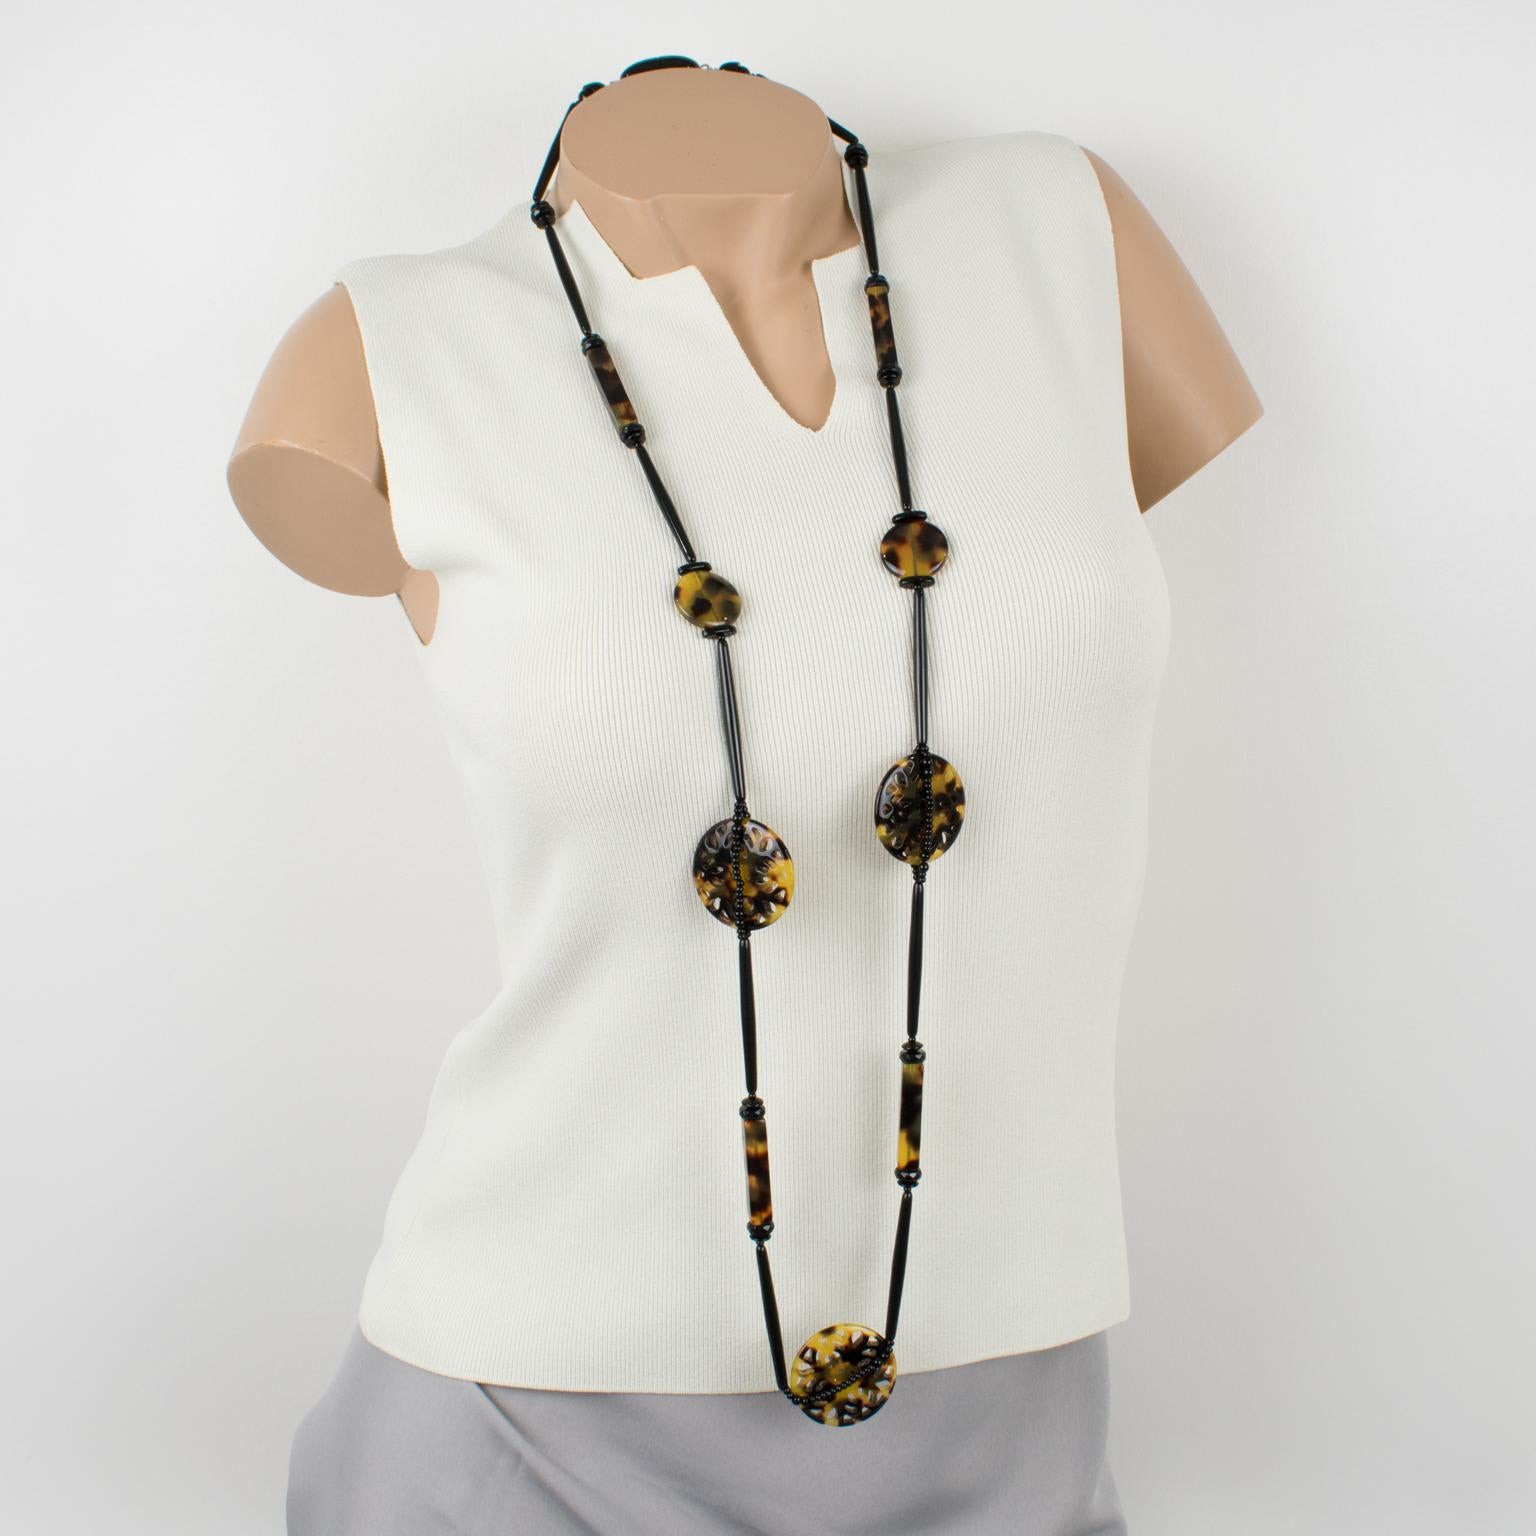 This sophisticated Angela Caputi, made in Italy, beaded necklace features an ethnic-inspired design for that extra-long length built with assorted shaped resin beads imitating tortoiseshell and black jet. Three large medallions are carved and